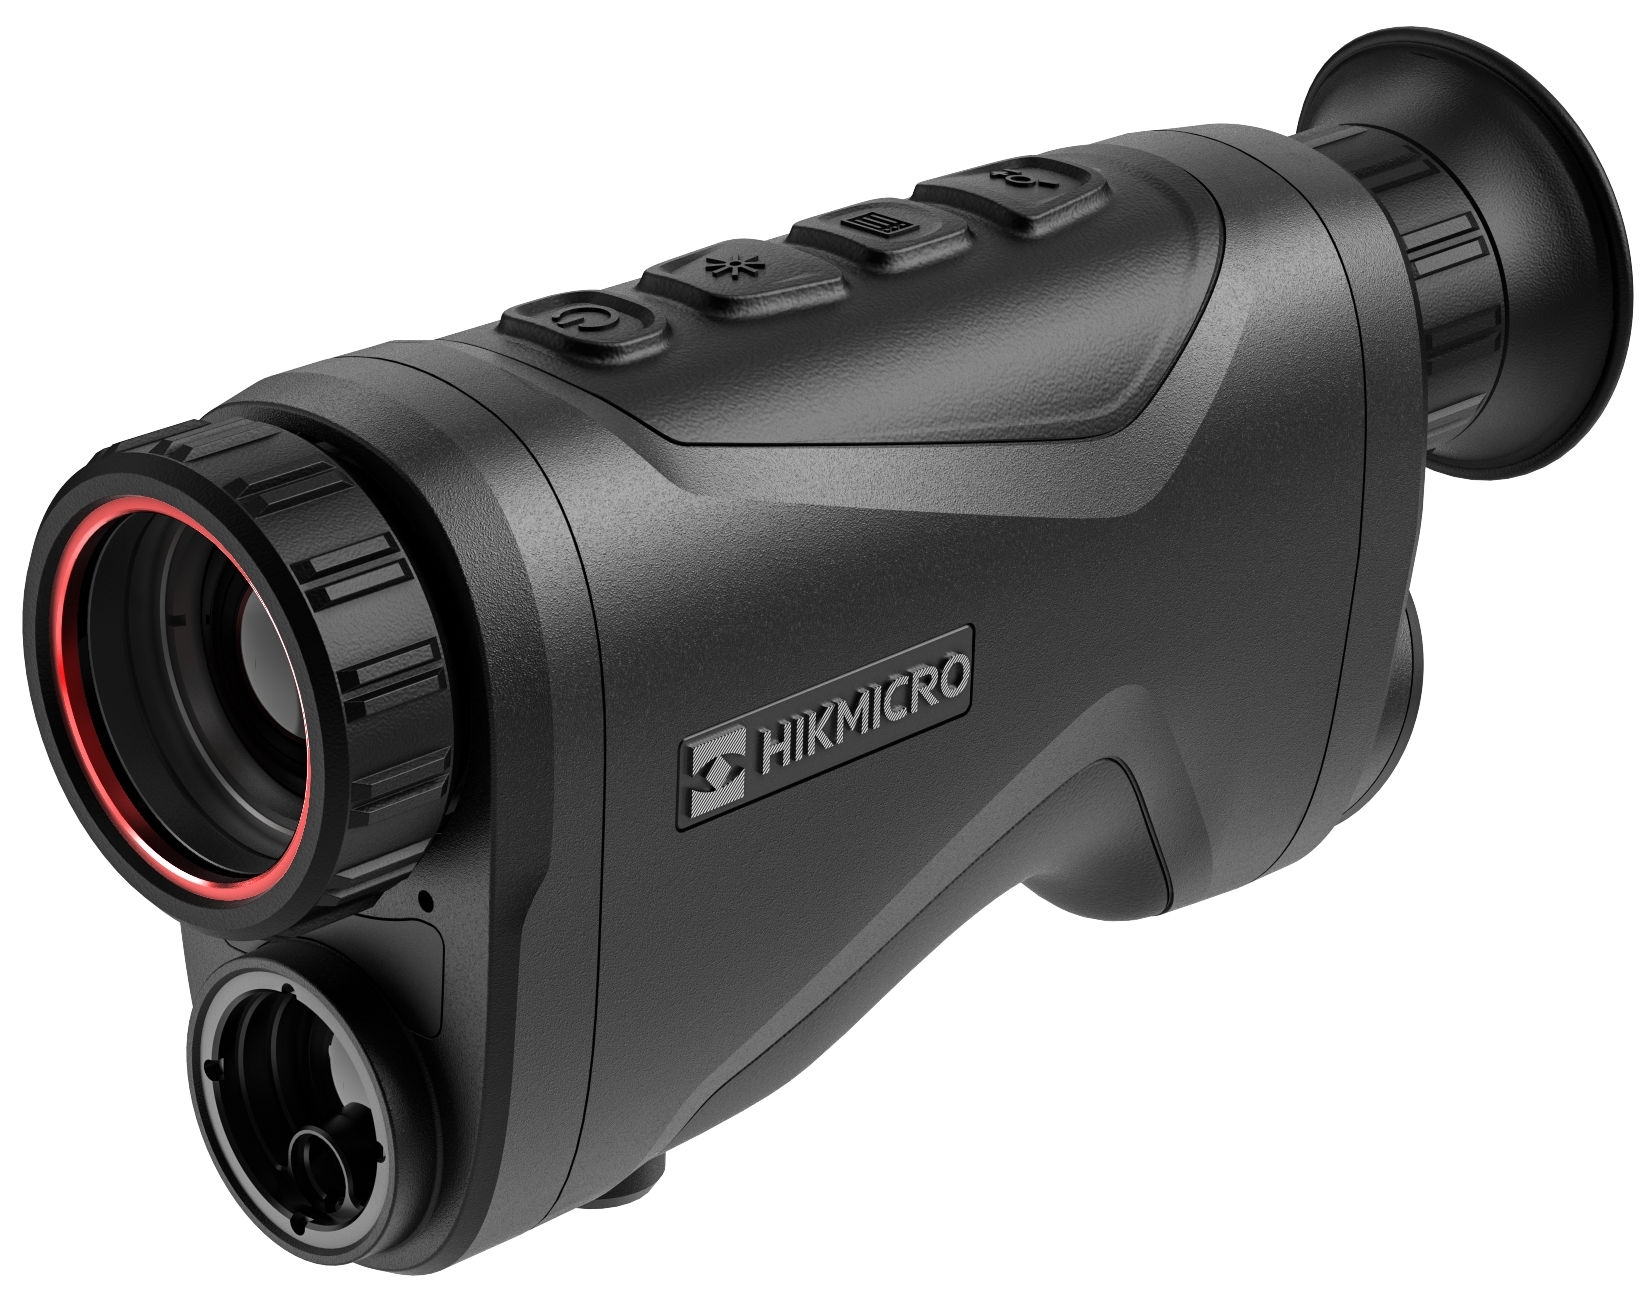 hikmicro ch25l condor thermal imager